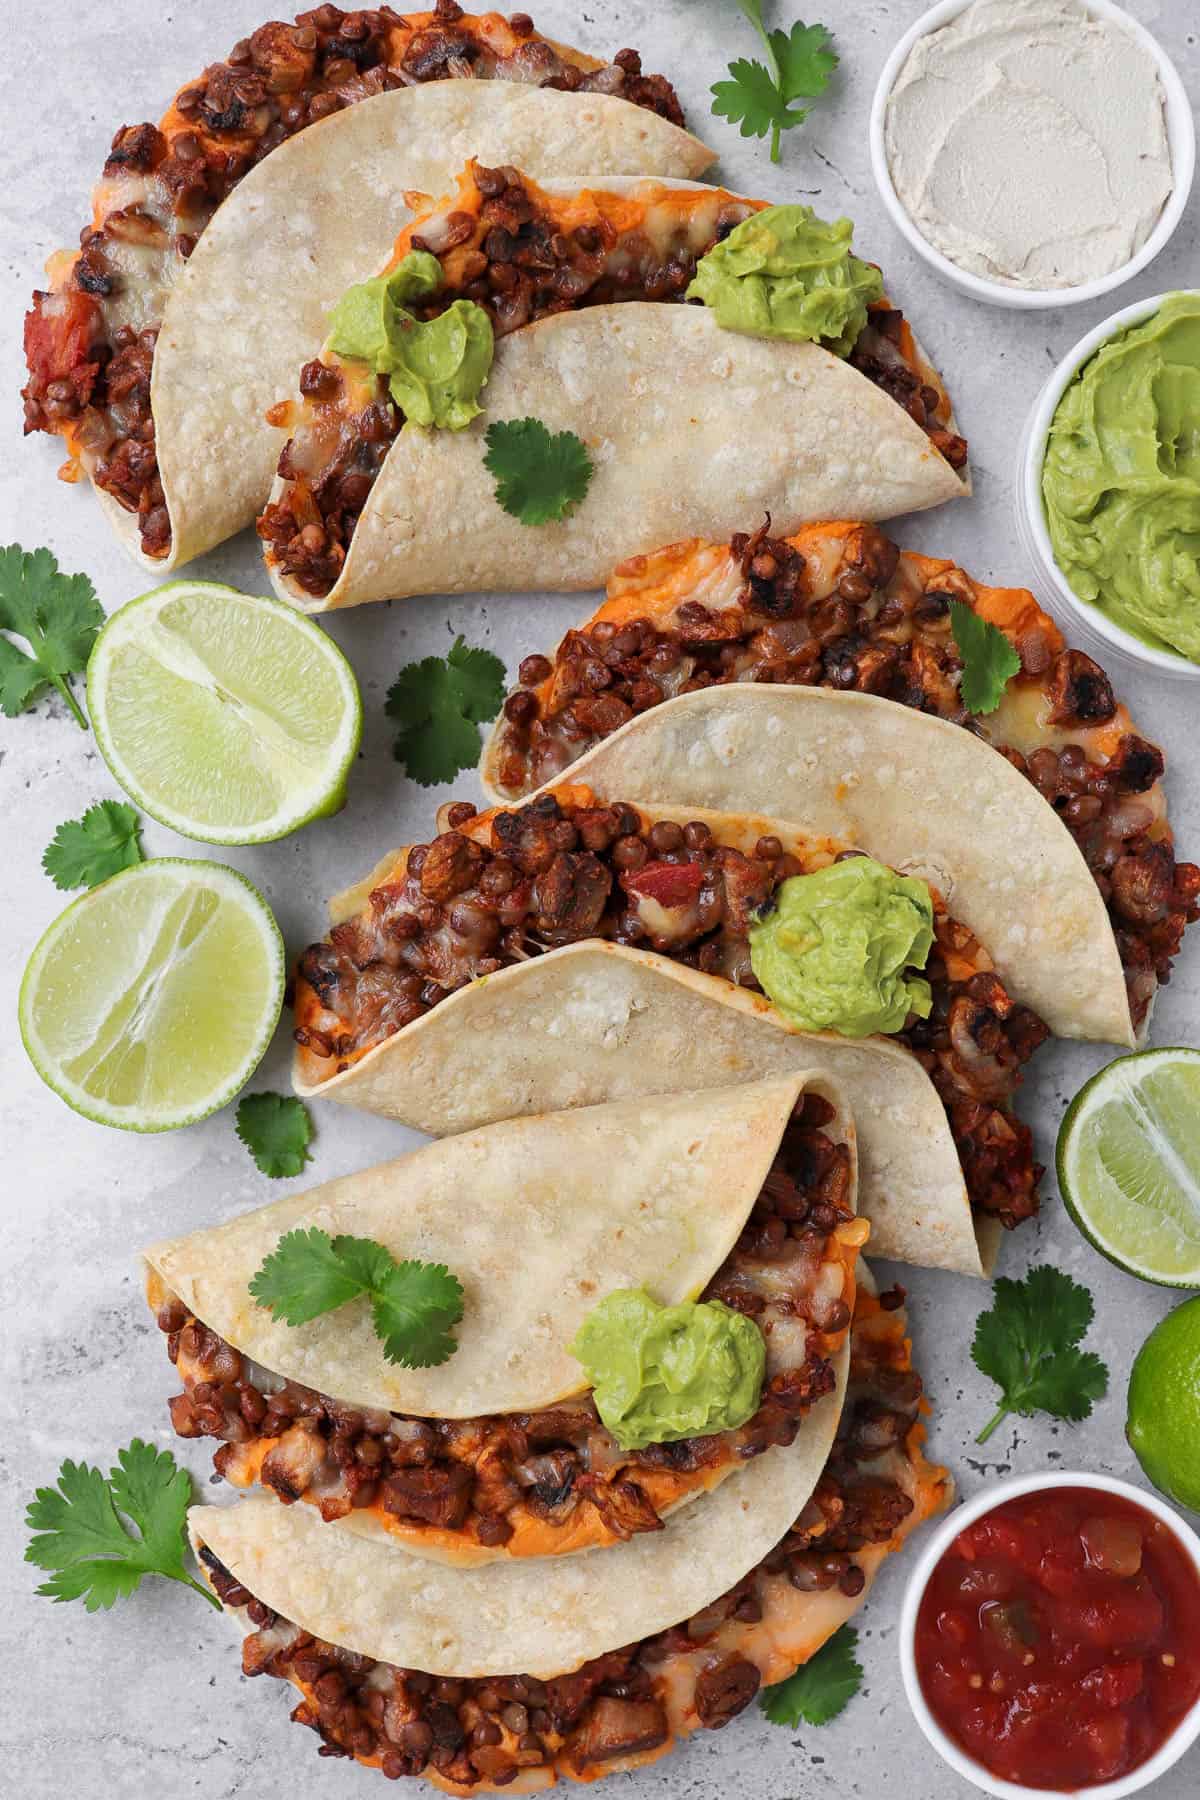 Baked tacos topped with guacamole. Fresh limes and salsa on side for decoration.